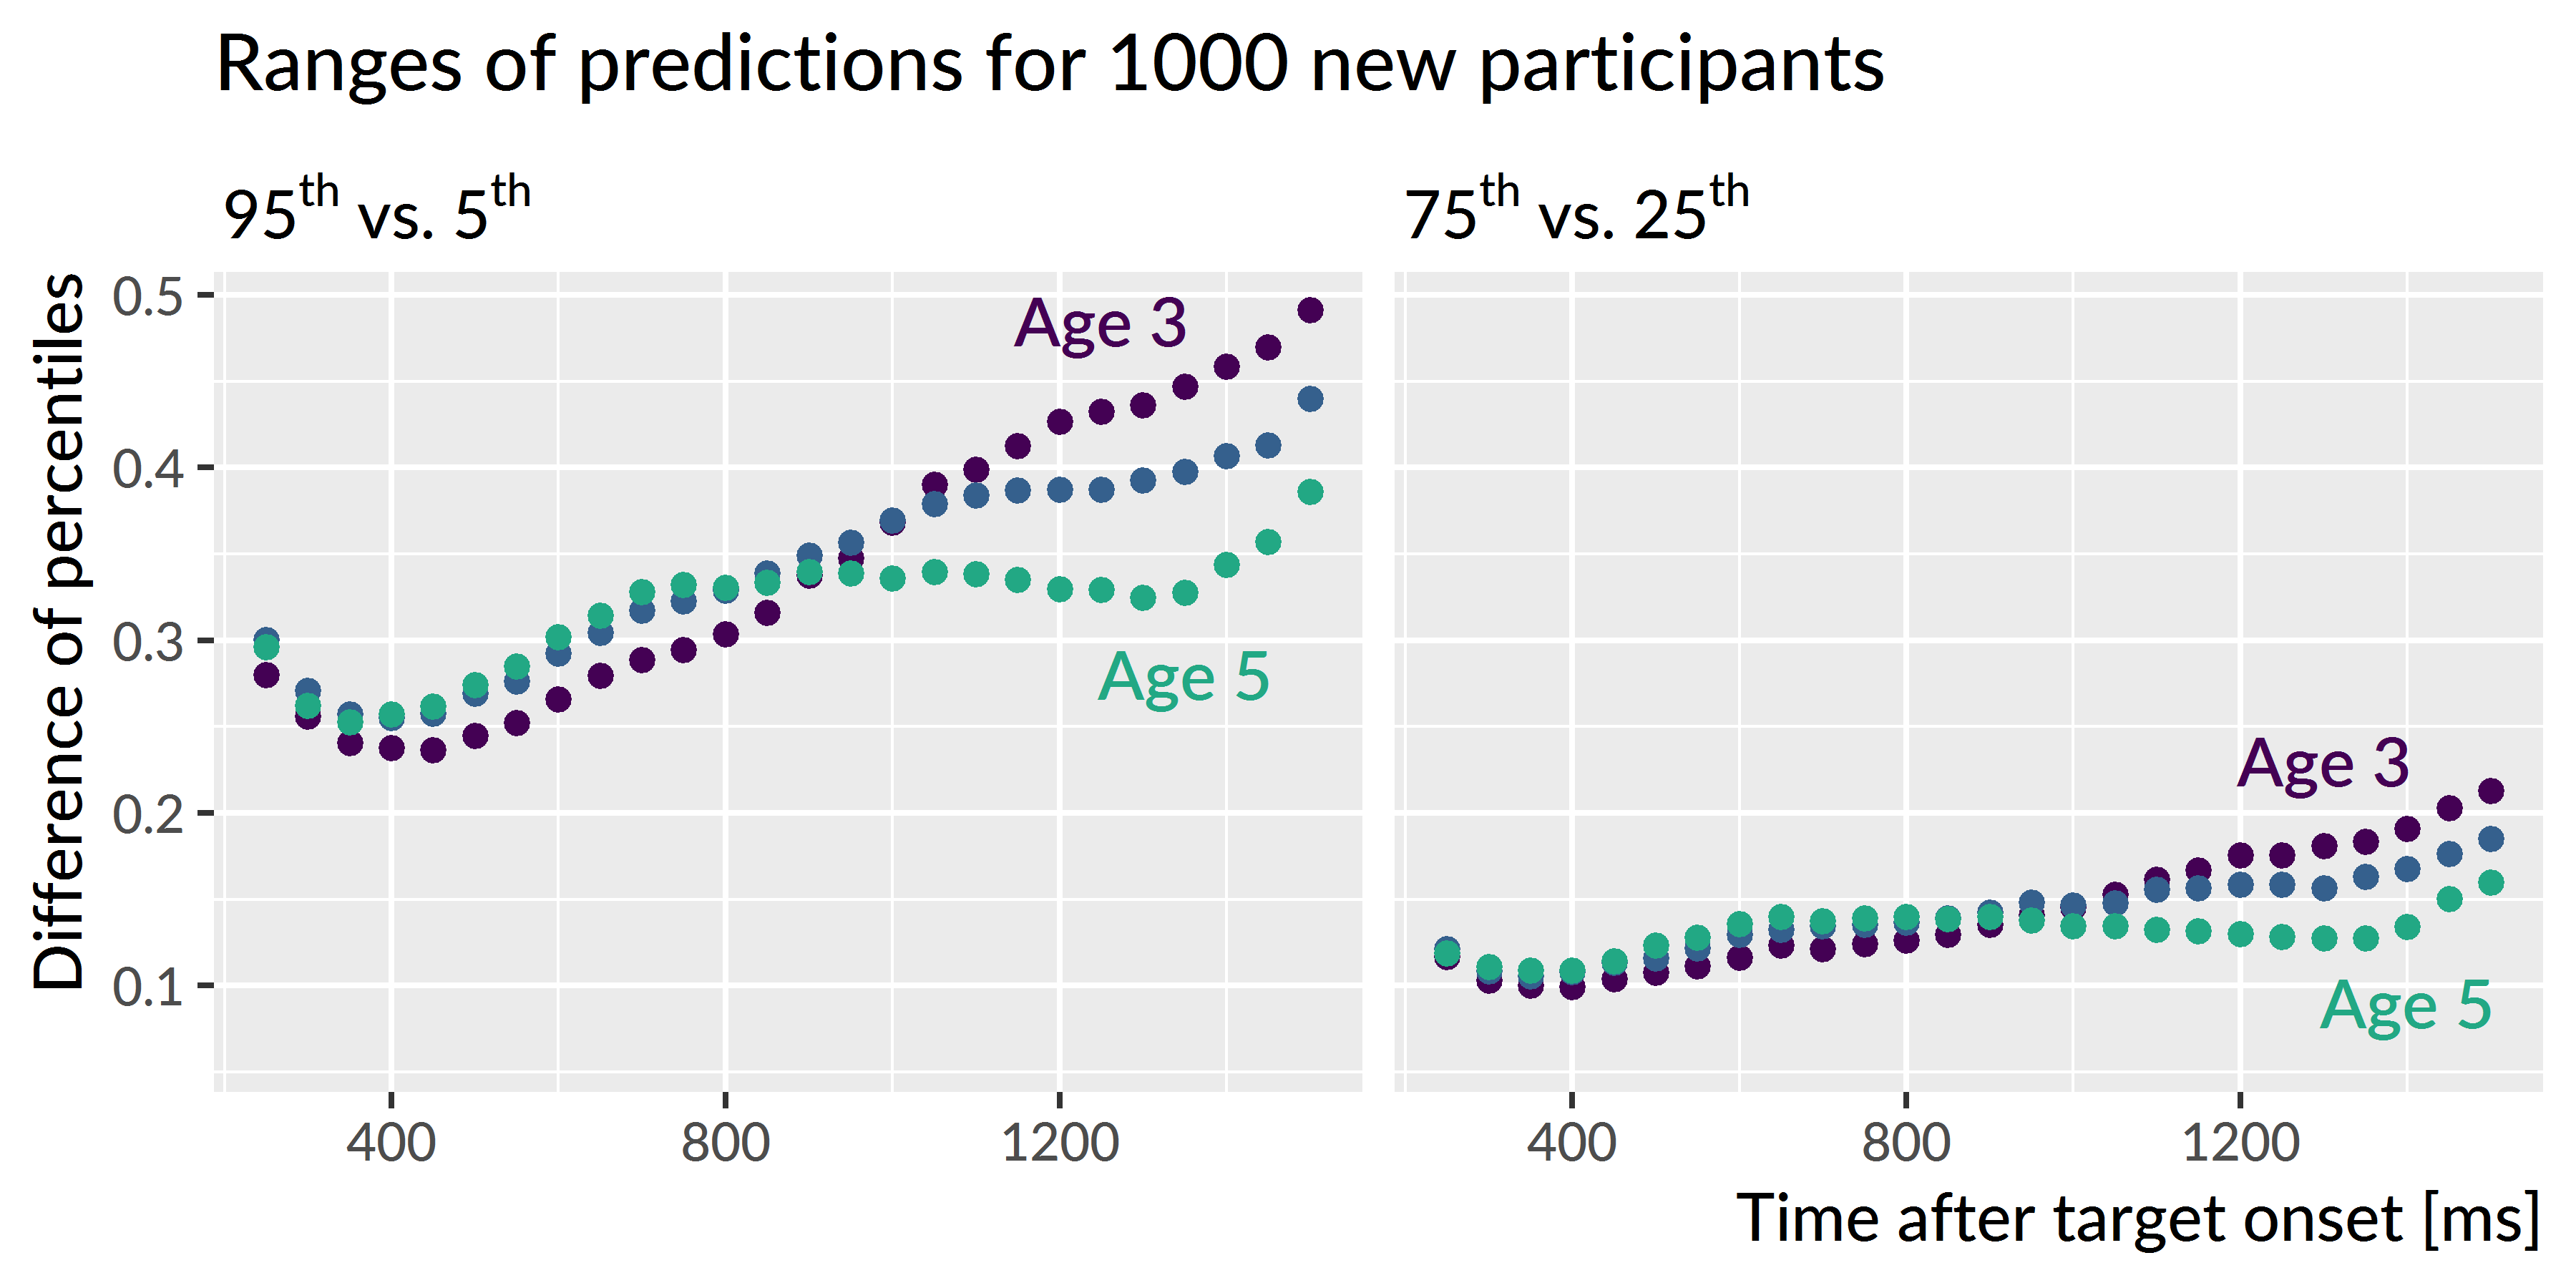 Ranges of predictions for simulated participants over the course of a trial. The ranges are most similar during the first half of the trial when participants are at chance performance, and the ranges are most different at the end of the trial as children reliably fixate on the target image. The ranges of performance decrease with each year of the study as children show less variability.